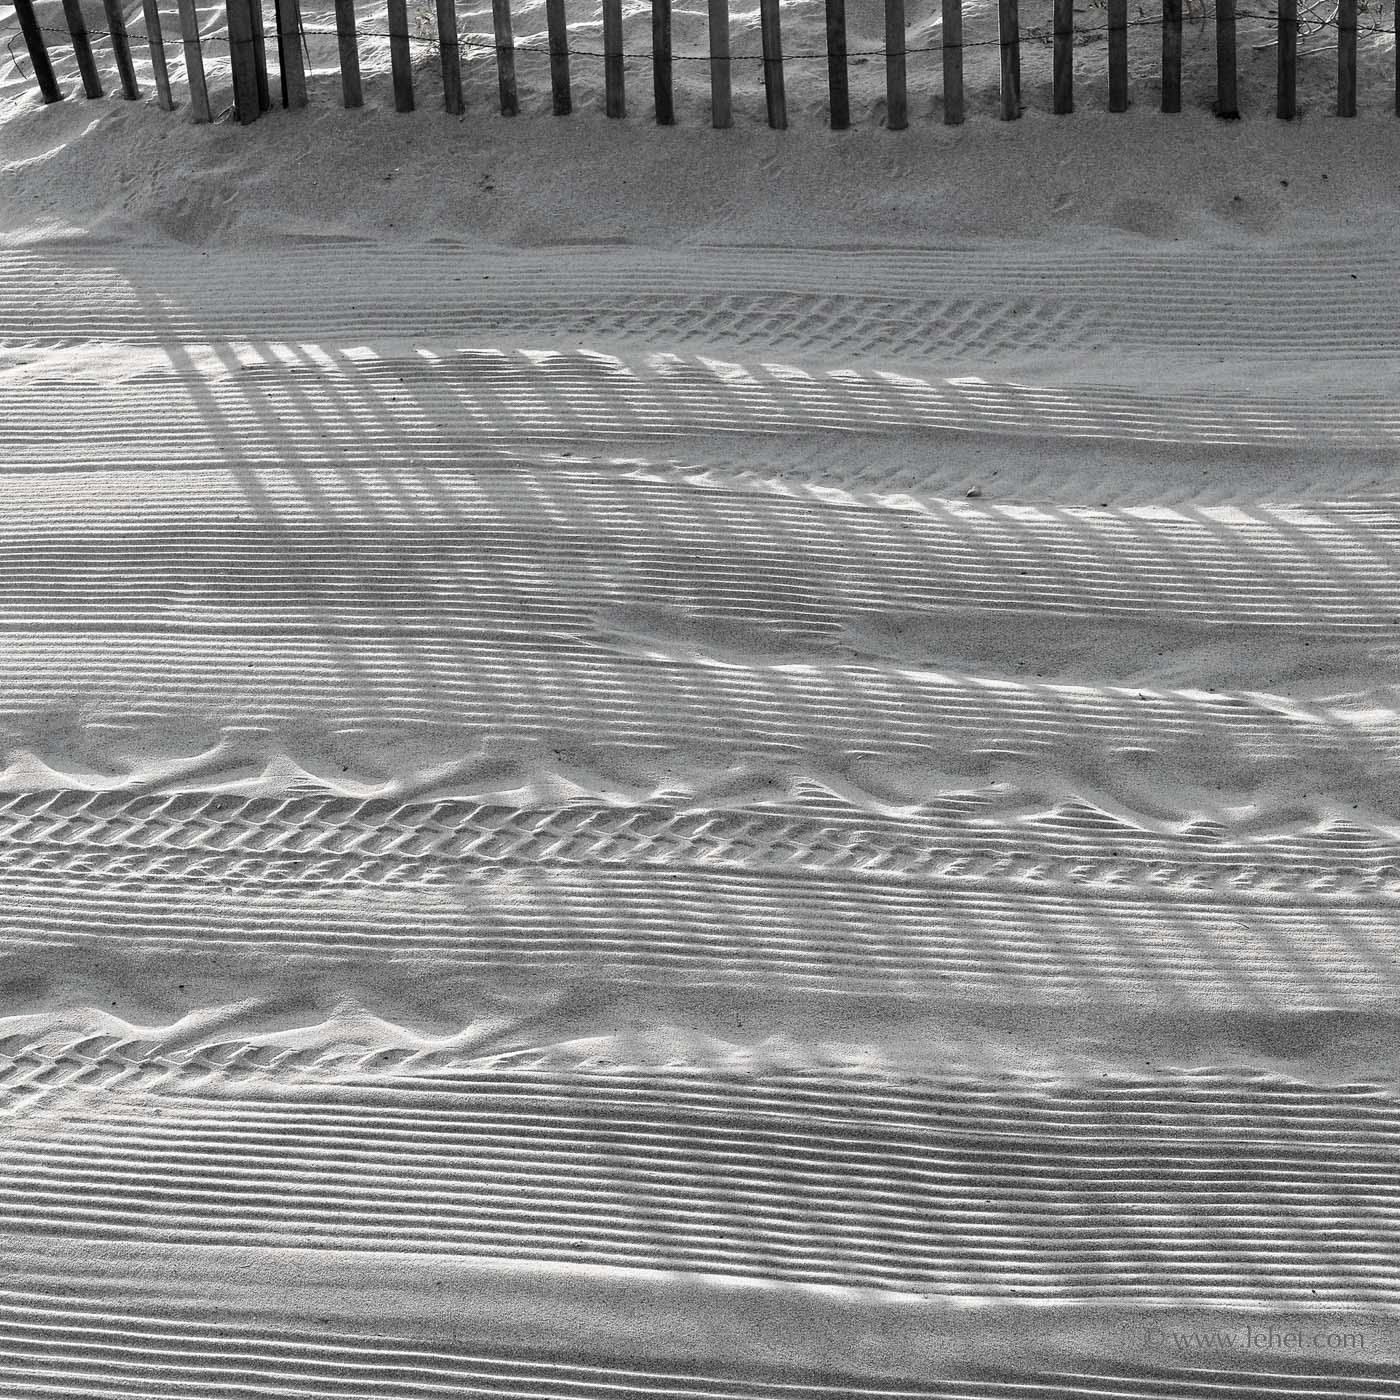 Dune Fence and Beach Grooming, Jersey Shore